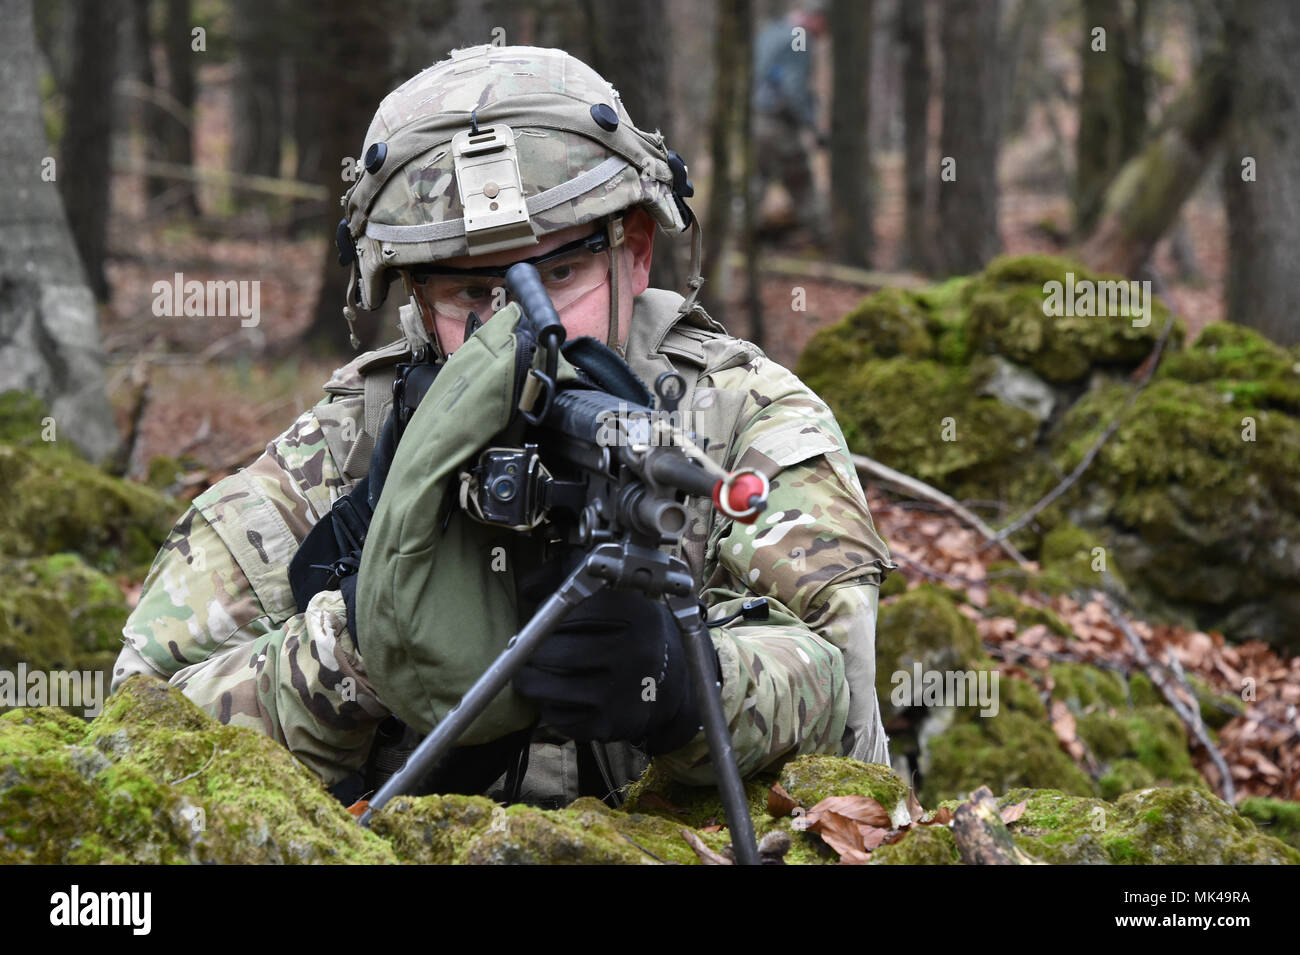 U.S. Army Cpl. Derik Meyers with D Troop, Regimental Engineer Squadron, 2nd Cavalry Regiment provides security during Exercise Allied Spirit VII at the 7th Army Training Command’s Hohenfels Training Area, Germany, Nov. 8, 2017. Approximately 4,050 service members from 13 nations are participating in the exercise from Oct. 30 to Nov. 22, 2017. Allied Spirit is a U.S. Army Europe-directed, 7ATC-conducted multinational exercise series designed to develop and enhance NATO and key partner’s interoperability and readiness. (U.S. Army photo by Gertrud Zach) Stock Photo